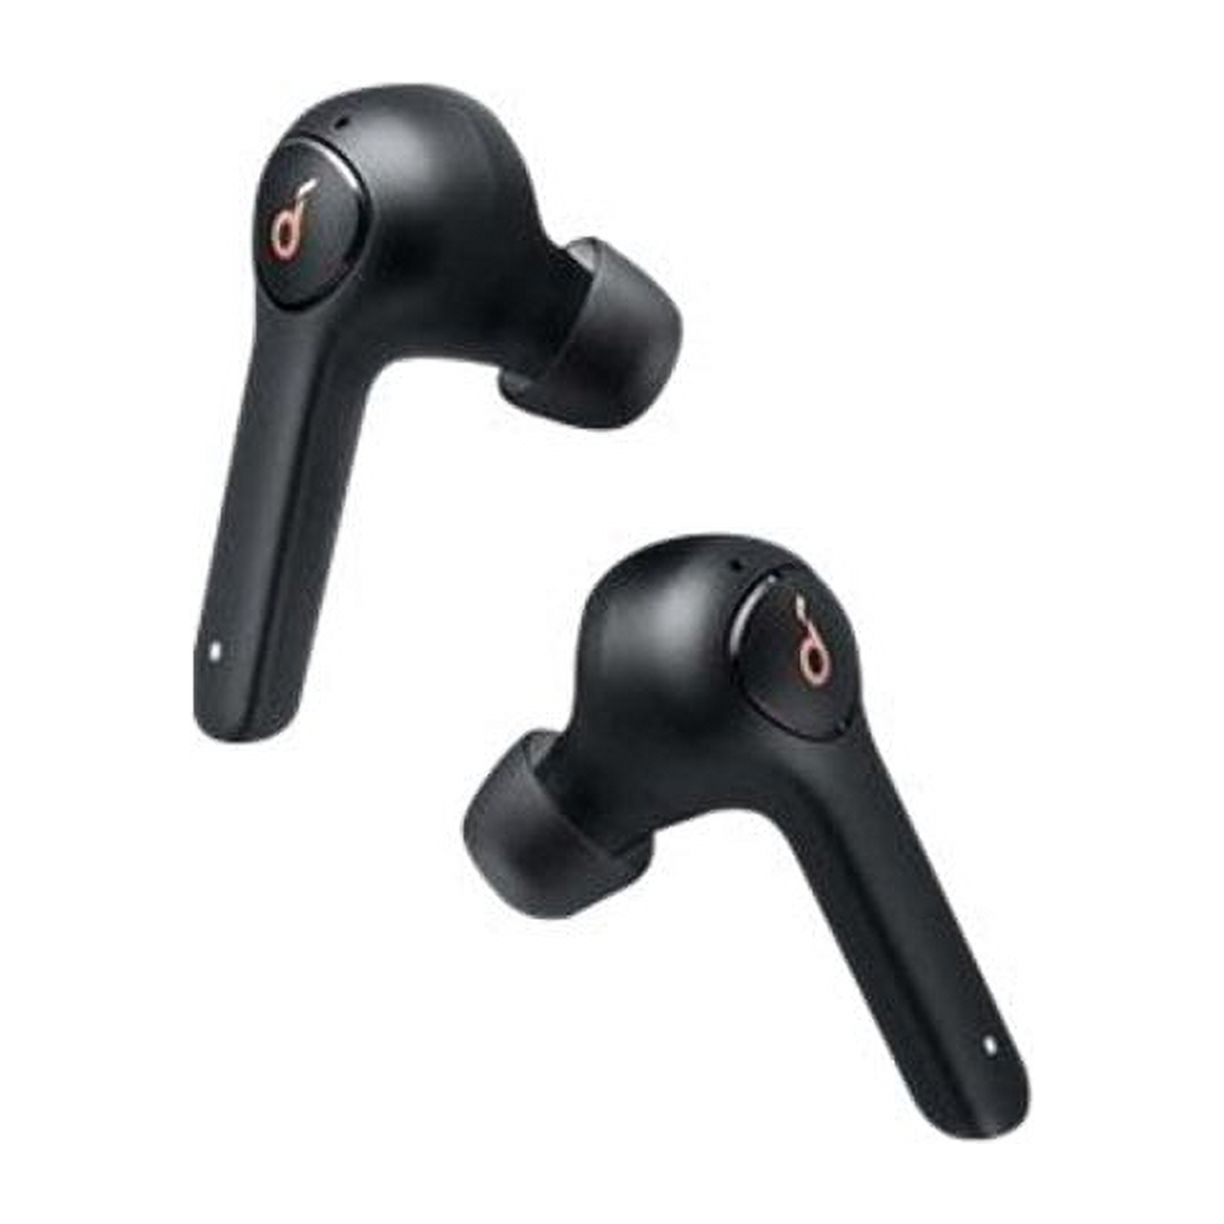 Soundcore Earbuds True Wireless Headphones with Charging Case, Black, A3919 - image 3 of 3